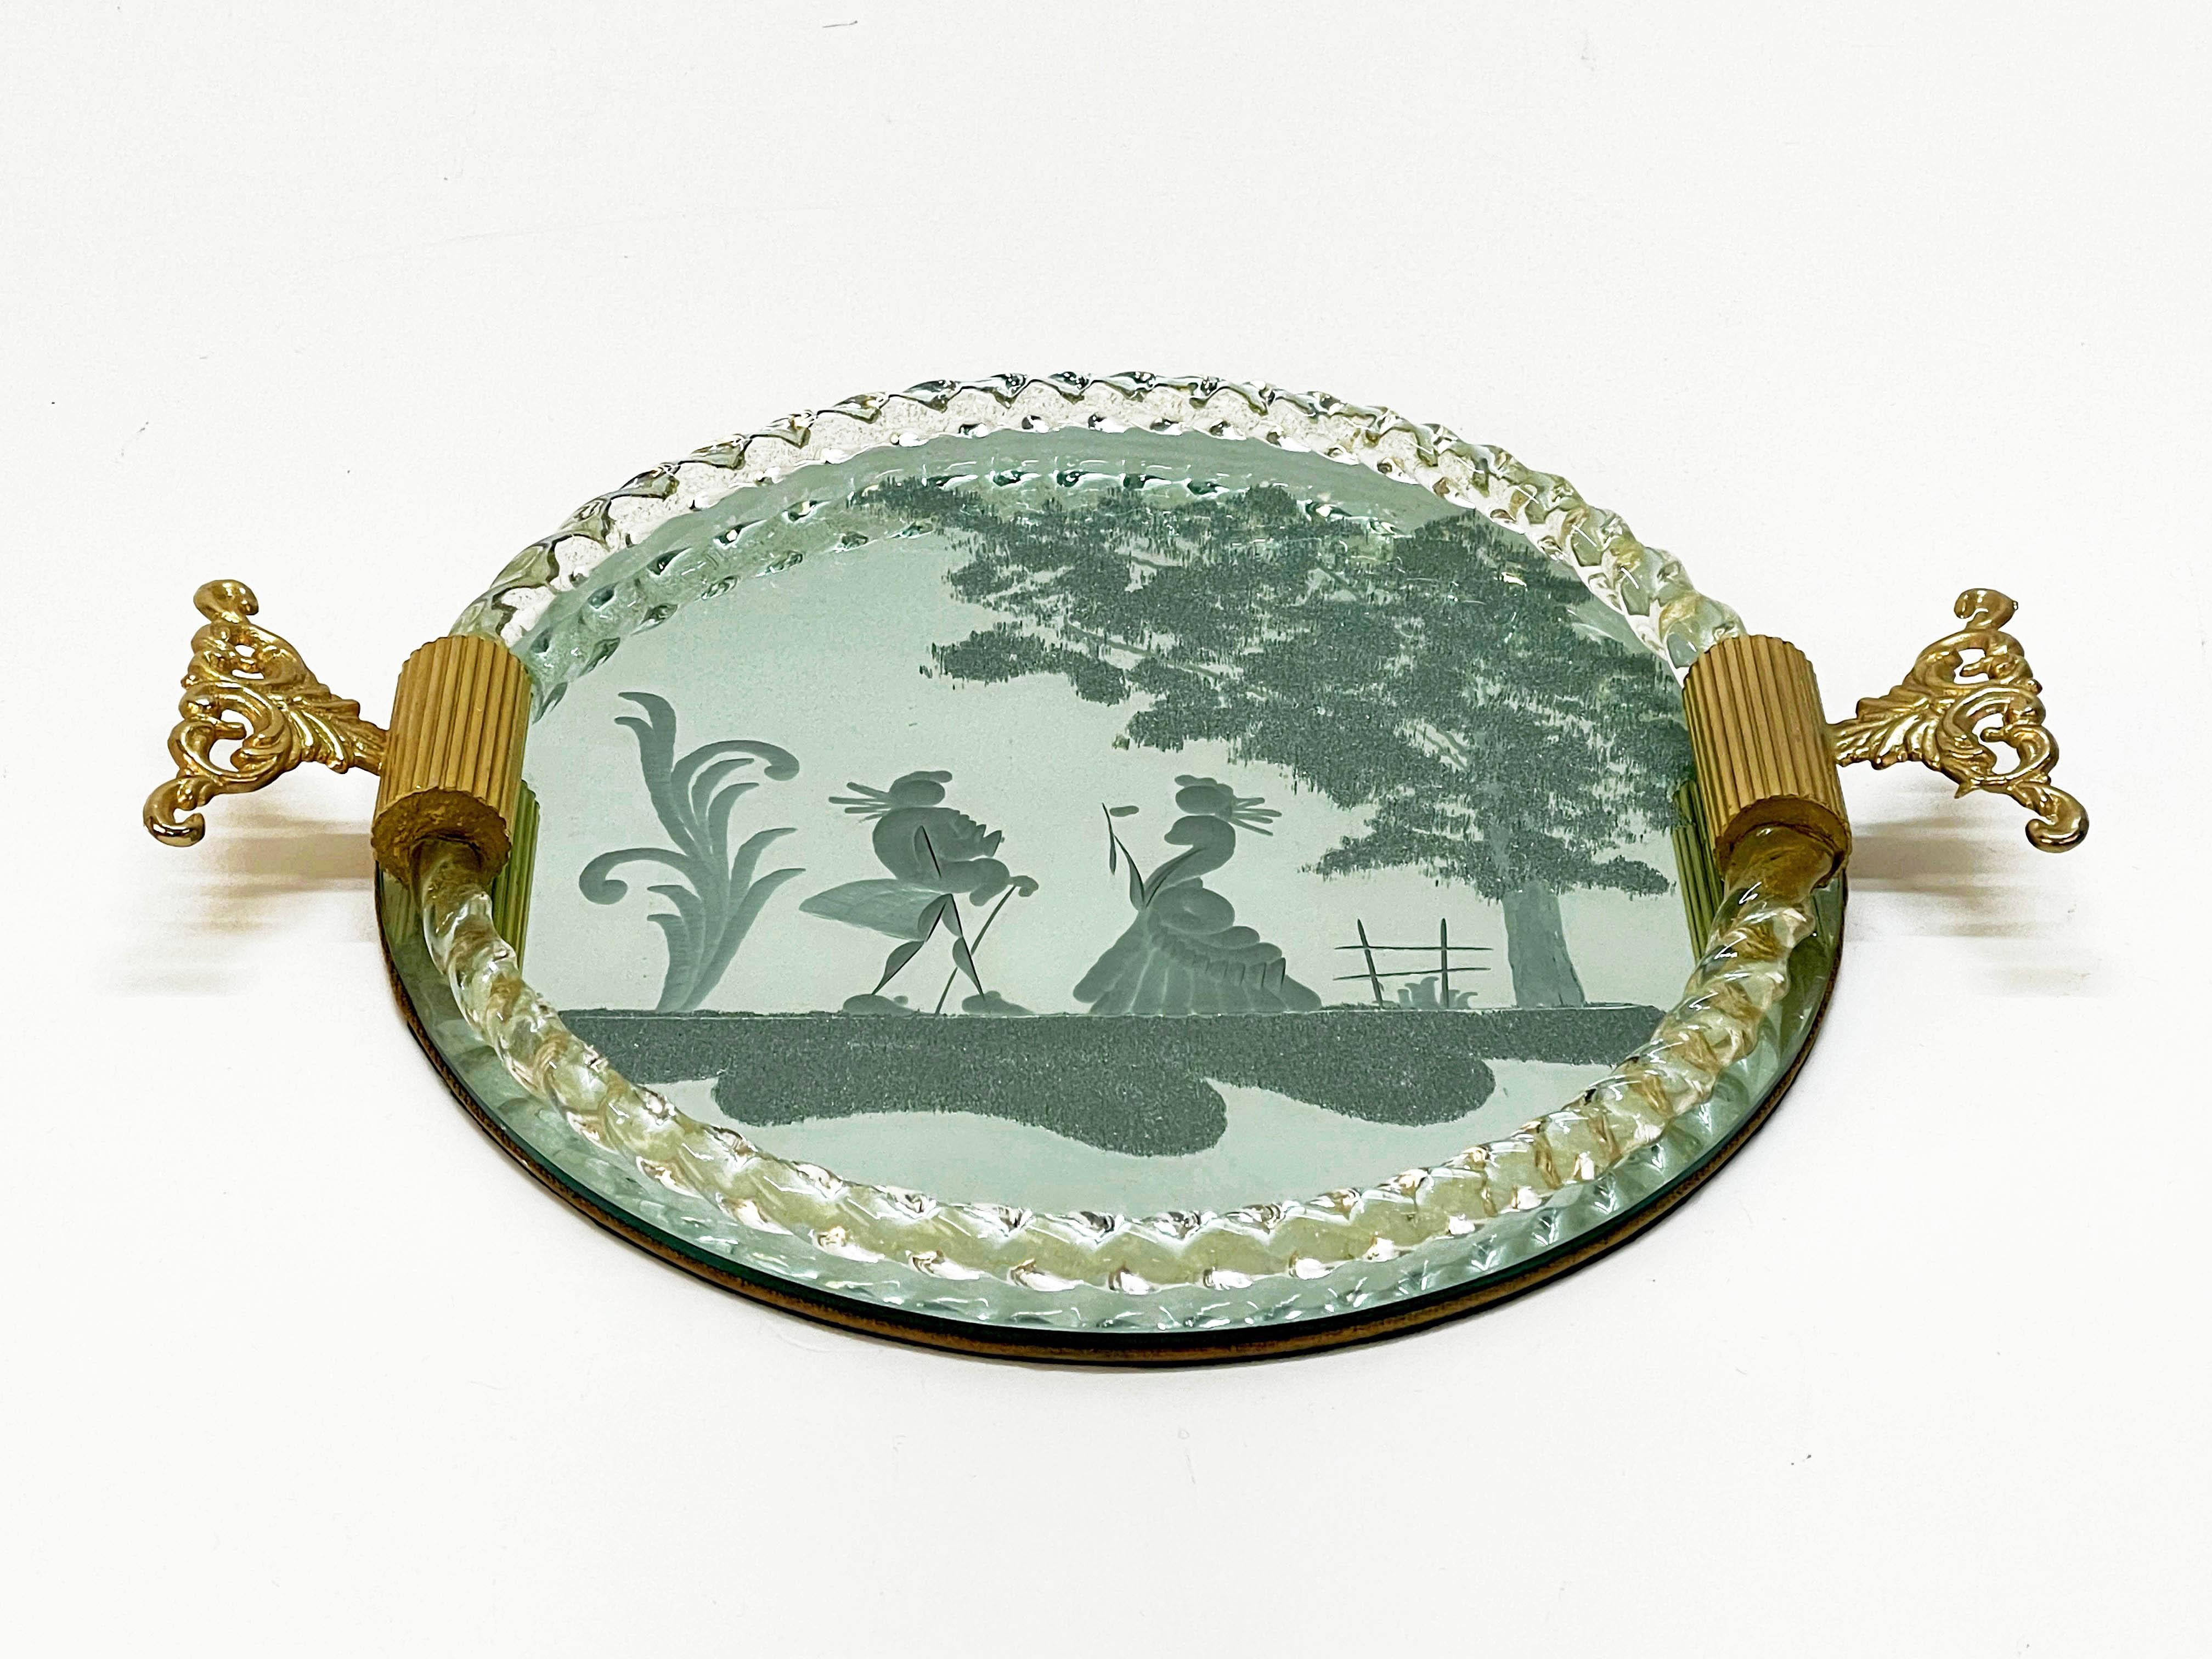 Gilt Ercole Barovier Mirror-Engraved Murano Glass Italian Serving Tray, 1940s For Sale